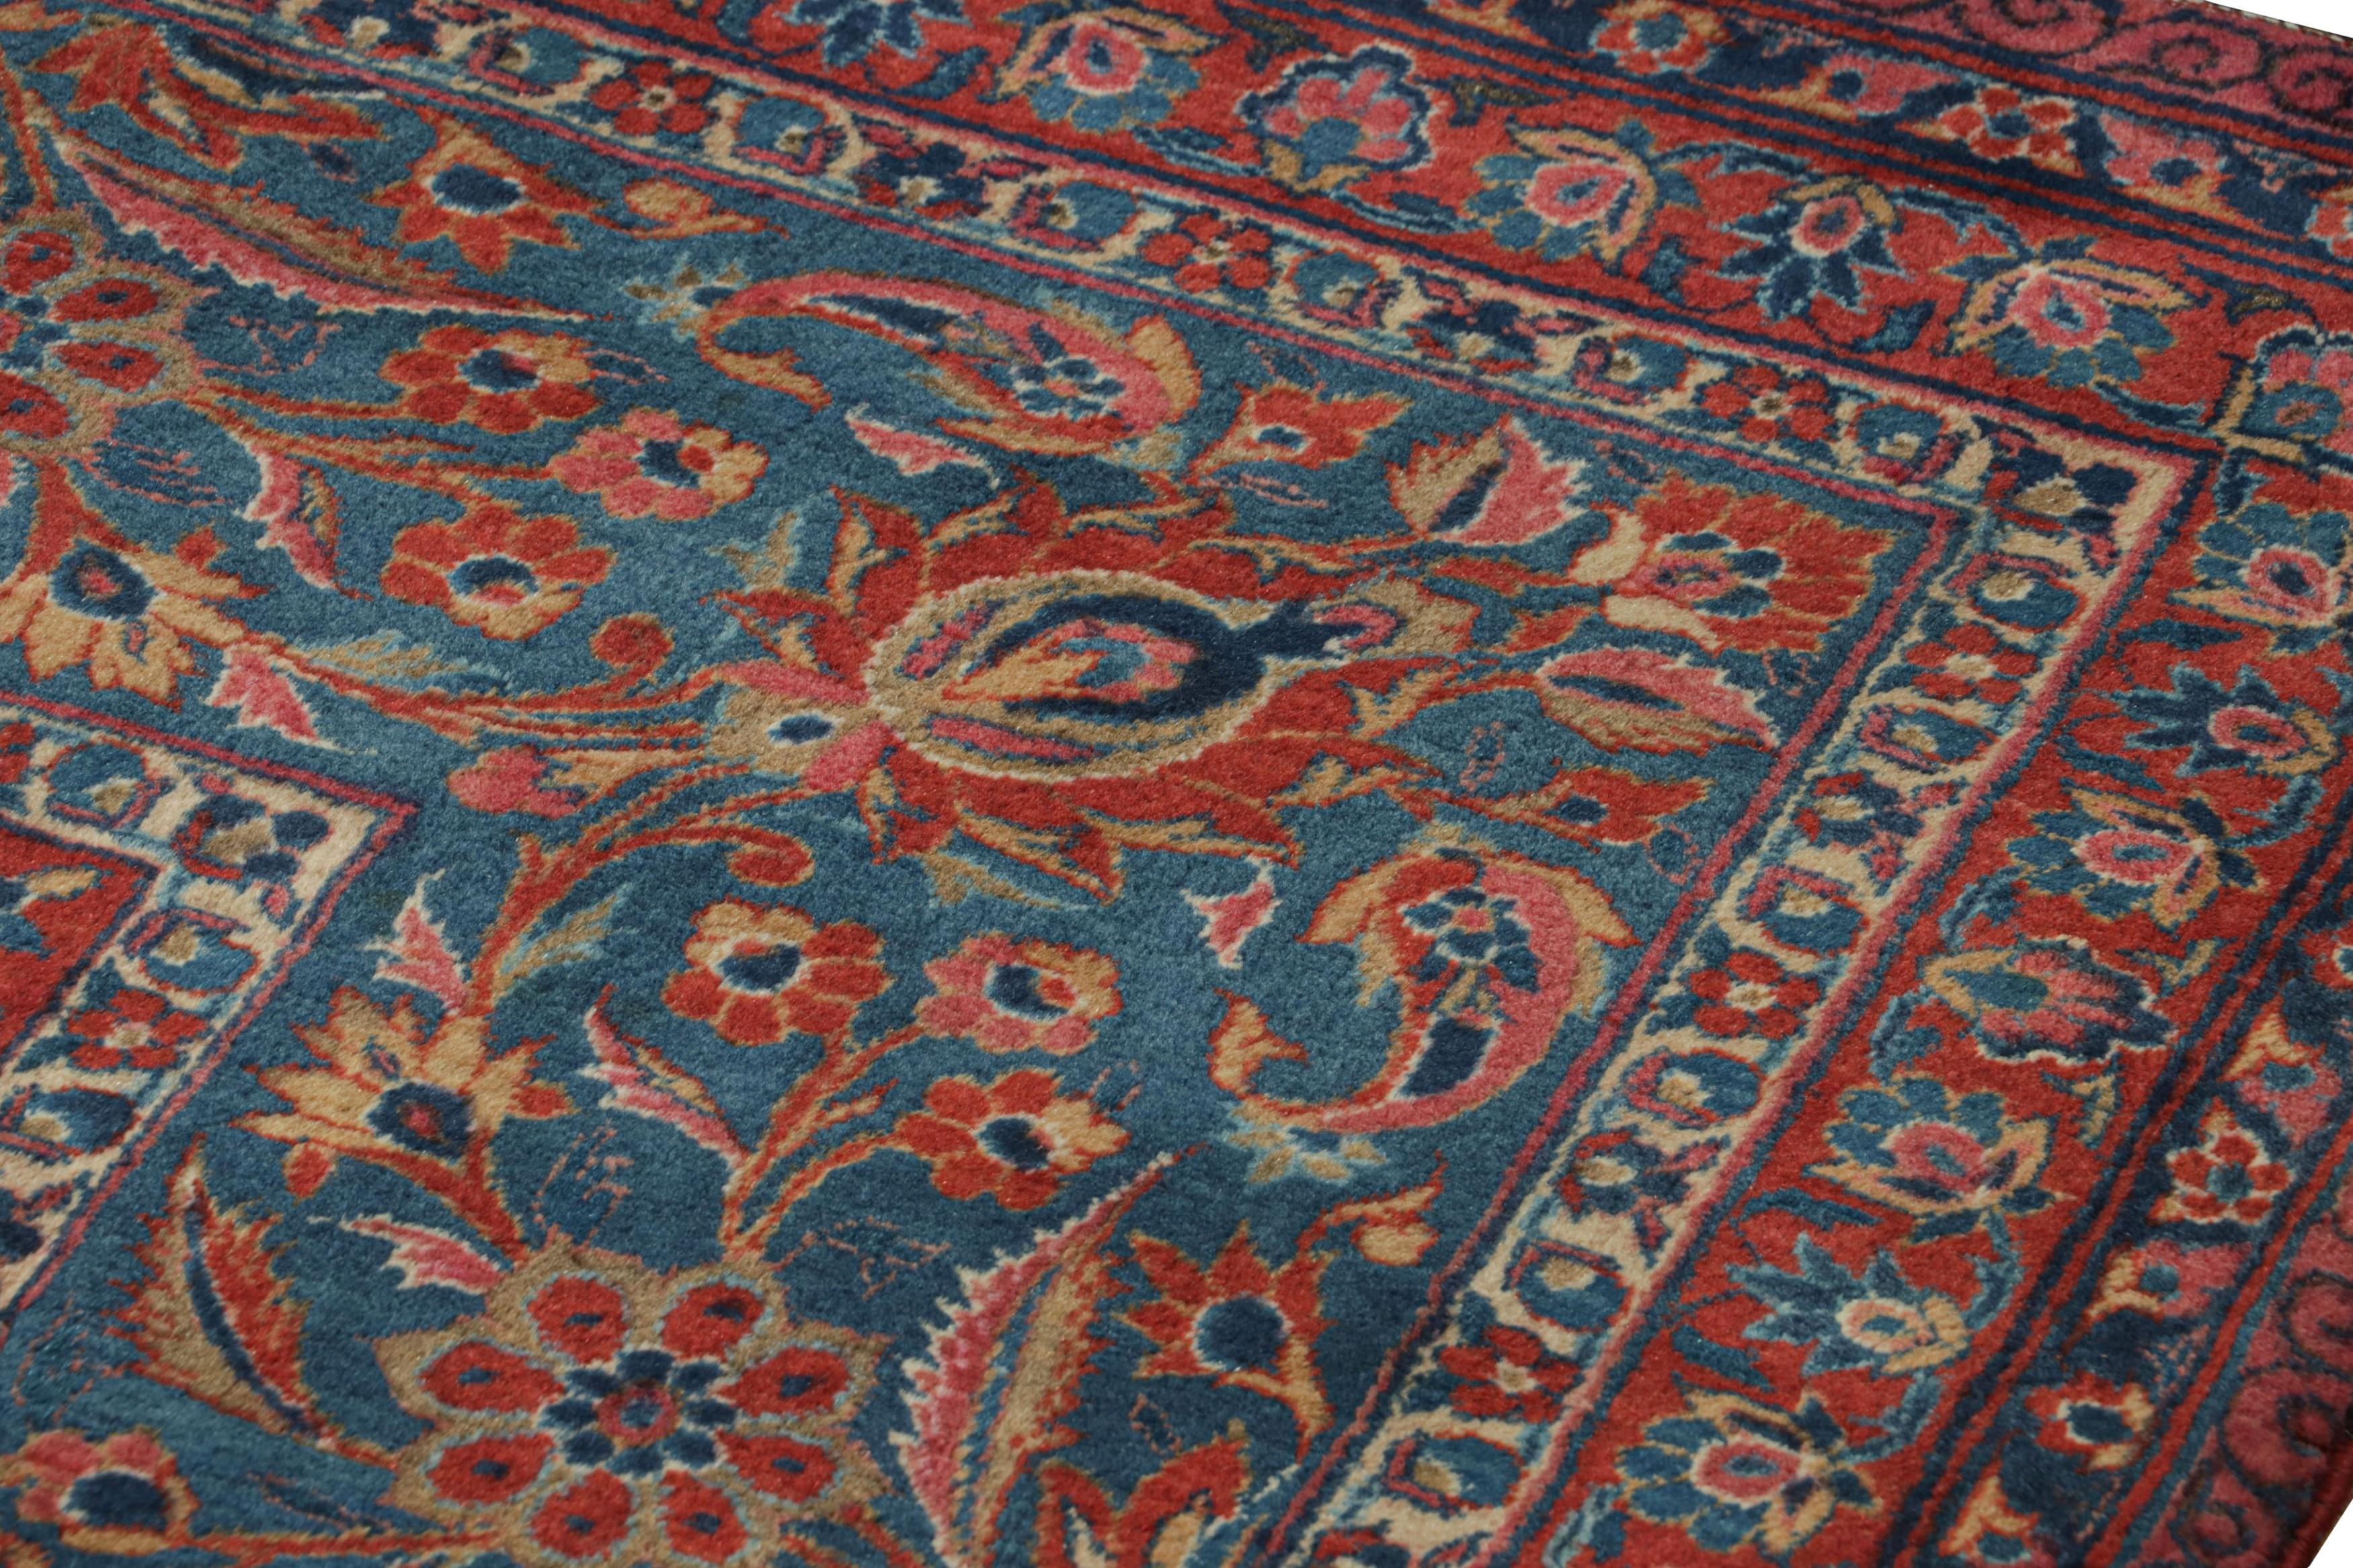 Early 20th Century Antique Persian Kashan Rug with Red-Blue Floral Patterns by Rug & Kilim For Sale